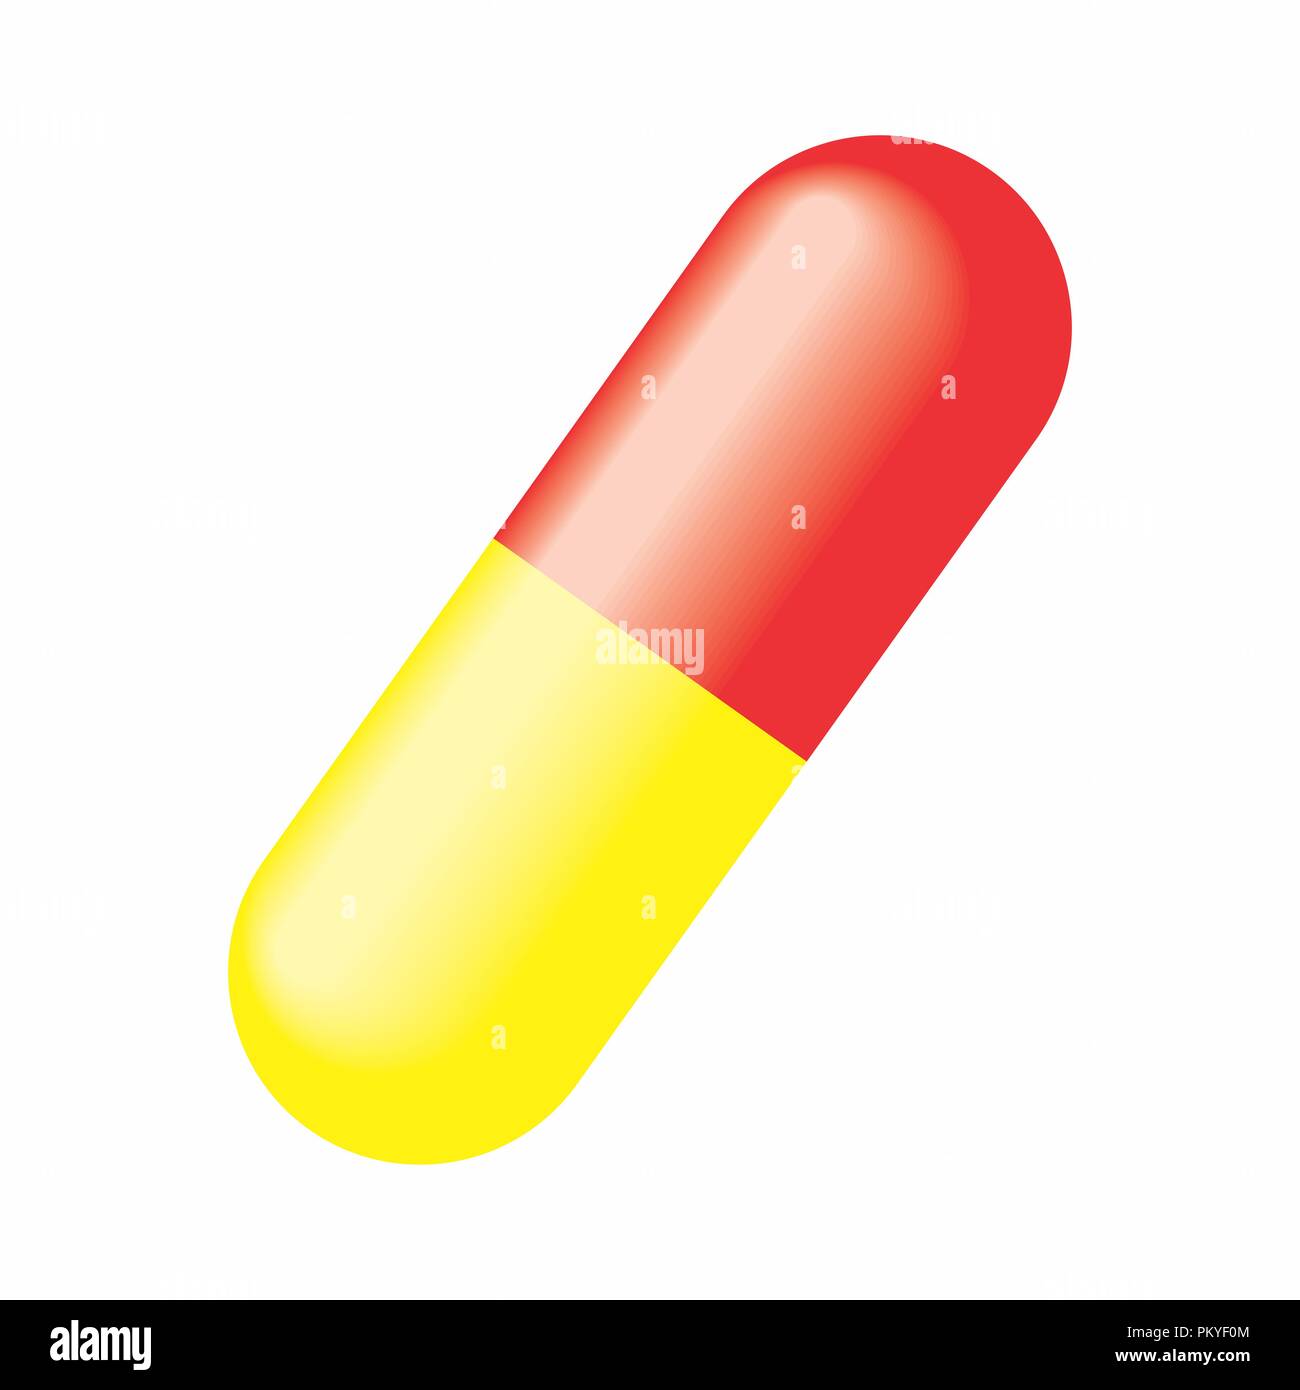 Colored illustration of a red and yellow remedy capsule Stock Vector